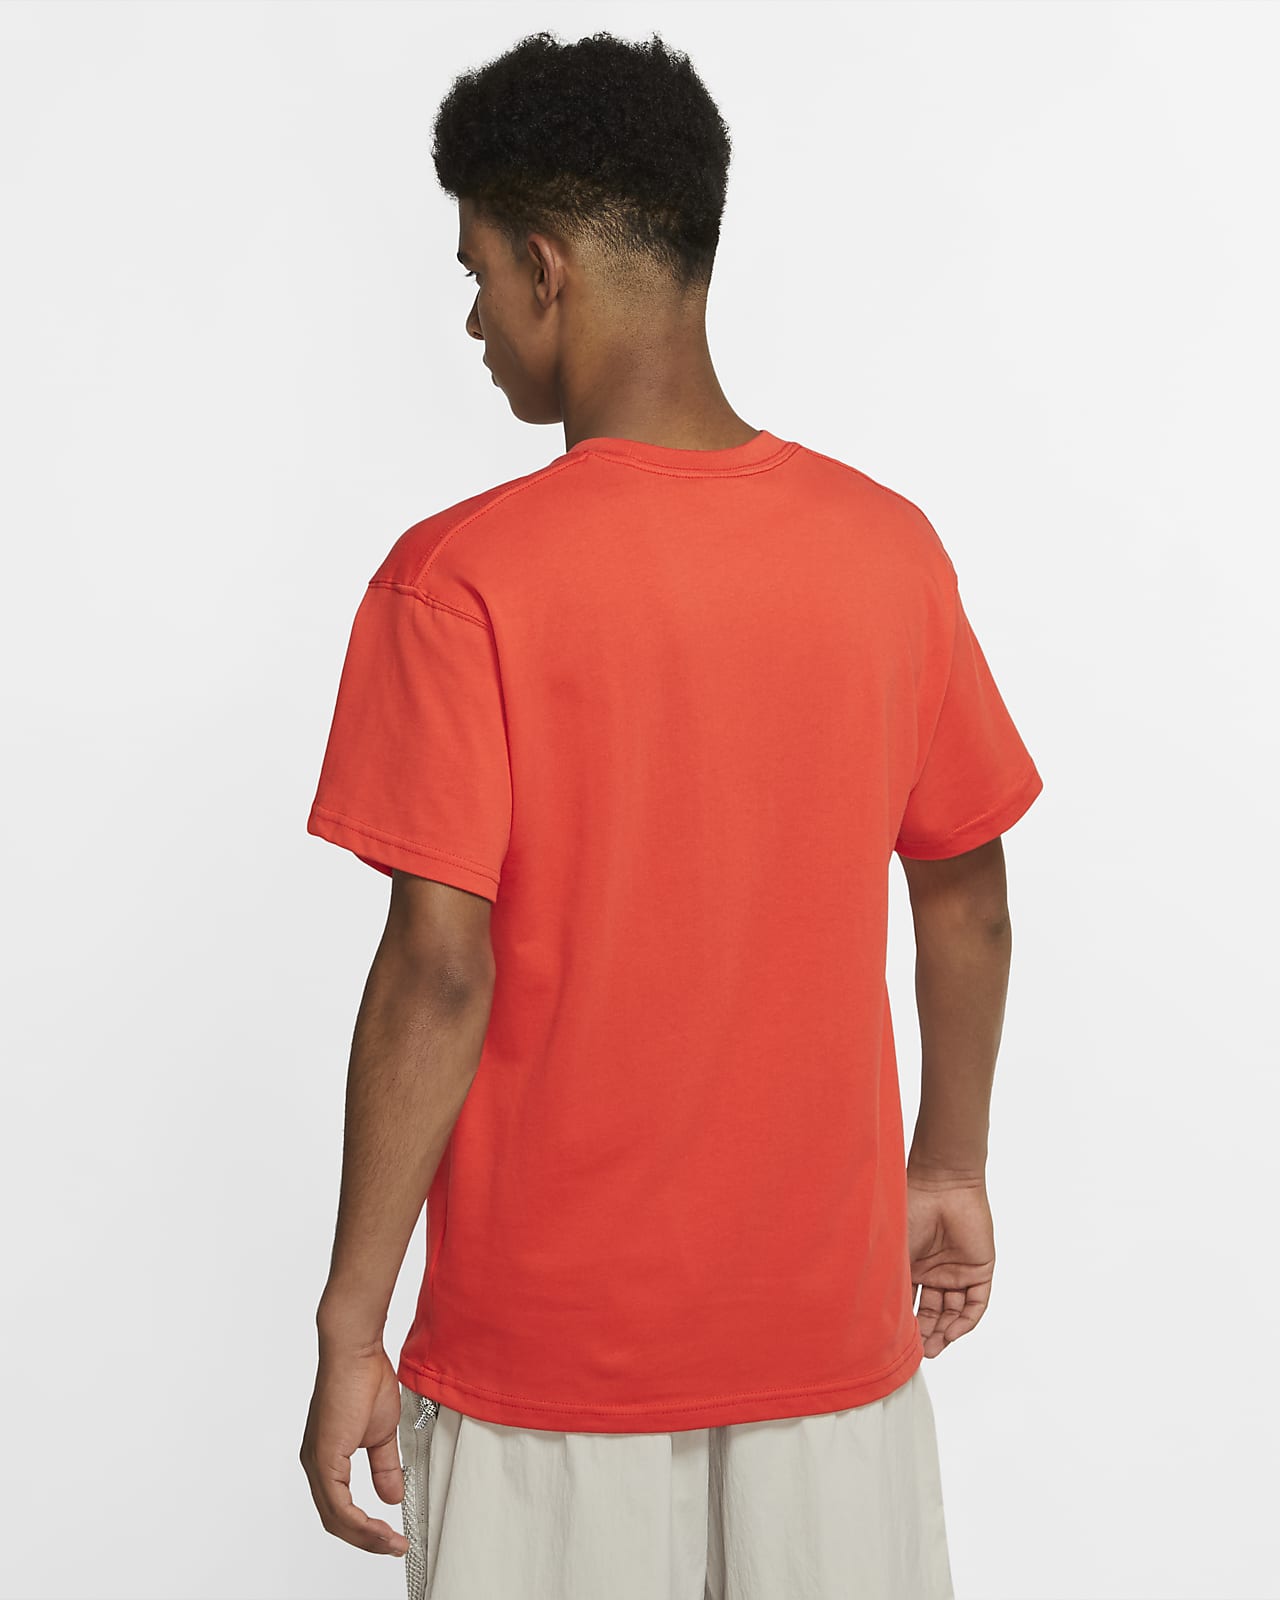 red nike graphic tees